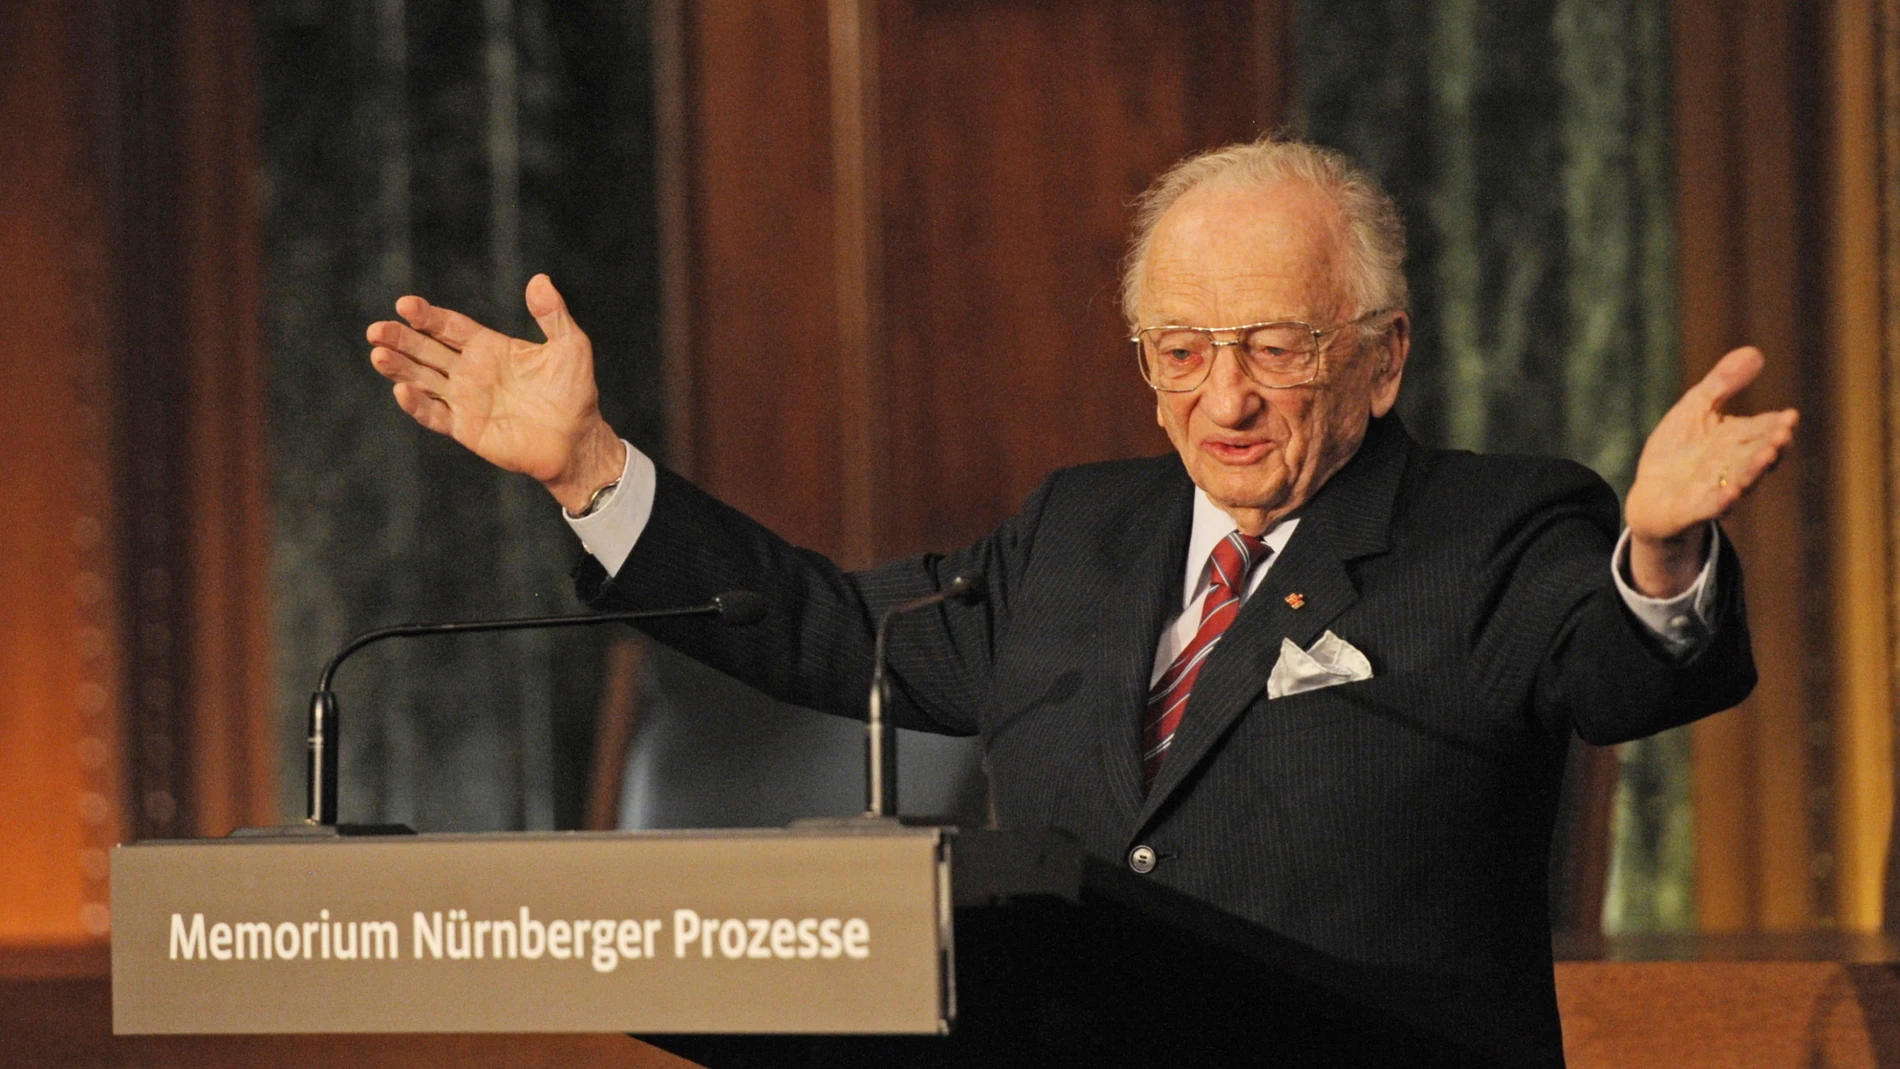 FILE - Benjamin Ferencz, Romanian-born American lawyer and chief prosecutor of the Nuremberg war crimes trials, speaks during an opening ceremony for the exhibition commemorating the Nuremberg war crimes trials in Nuremberg, Germany, Sunday, Nov. 21, 2010. Ferencz, the last living prosecutor from the Nuremberg trials, who tried Nazis for genocidal war crimes and was one of the first outside witnesses to document the atrocities of Nazi labor and concentration camps as a U.S. Army soldier, died Friday evening, April 7, 2023, in Boynton Beach, Fla.,, according to St. John's University law professor John Barrett, who runs a blog about the Nuremberg trials. He had just turned 103 in March. (Armin Weigel/Pool Photo via AP, File)